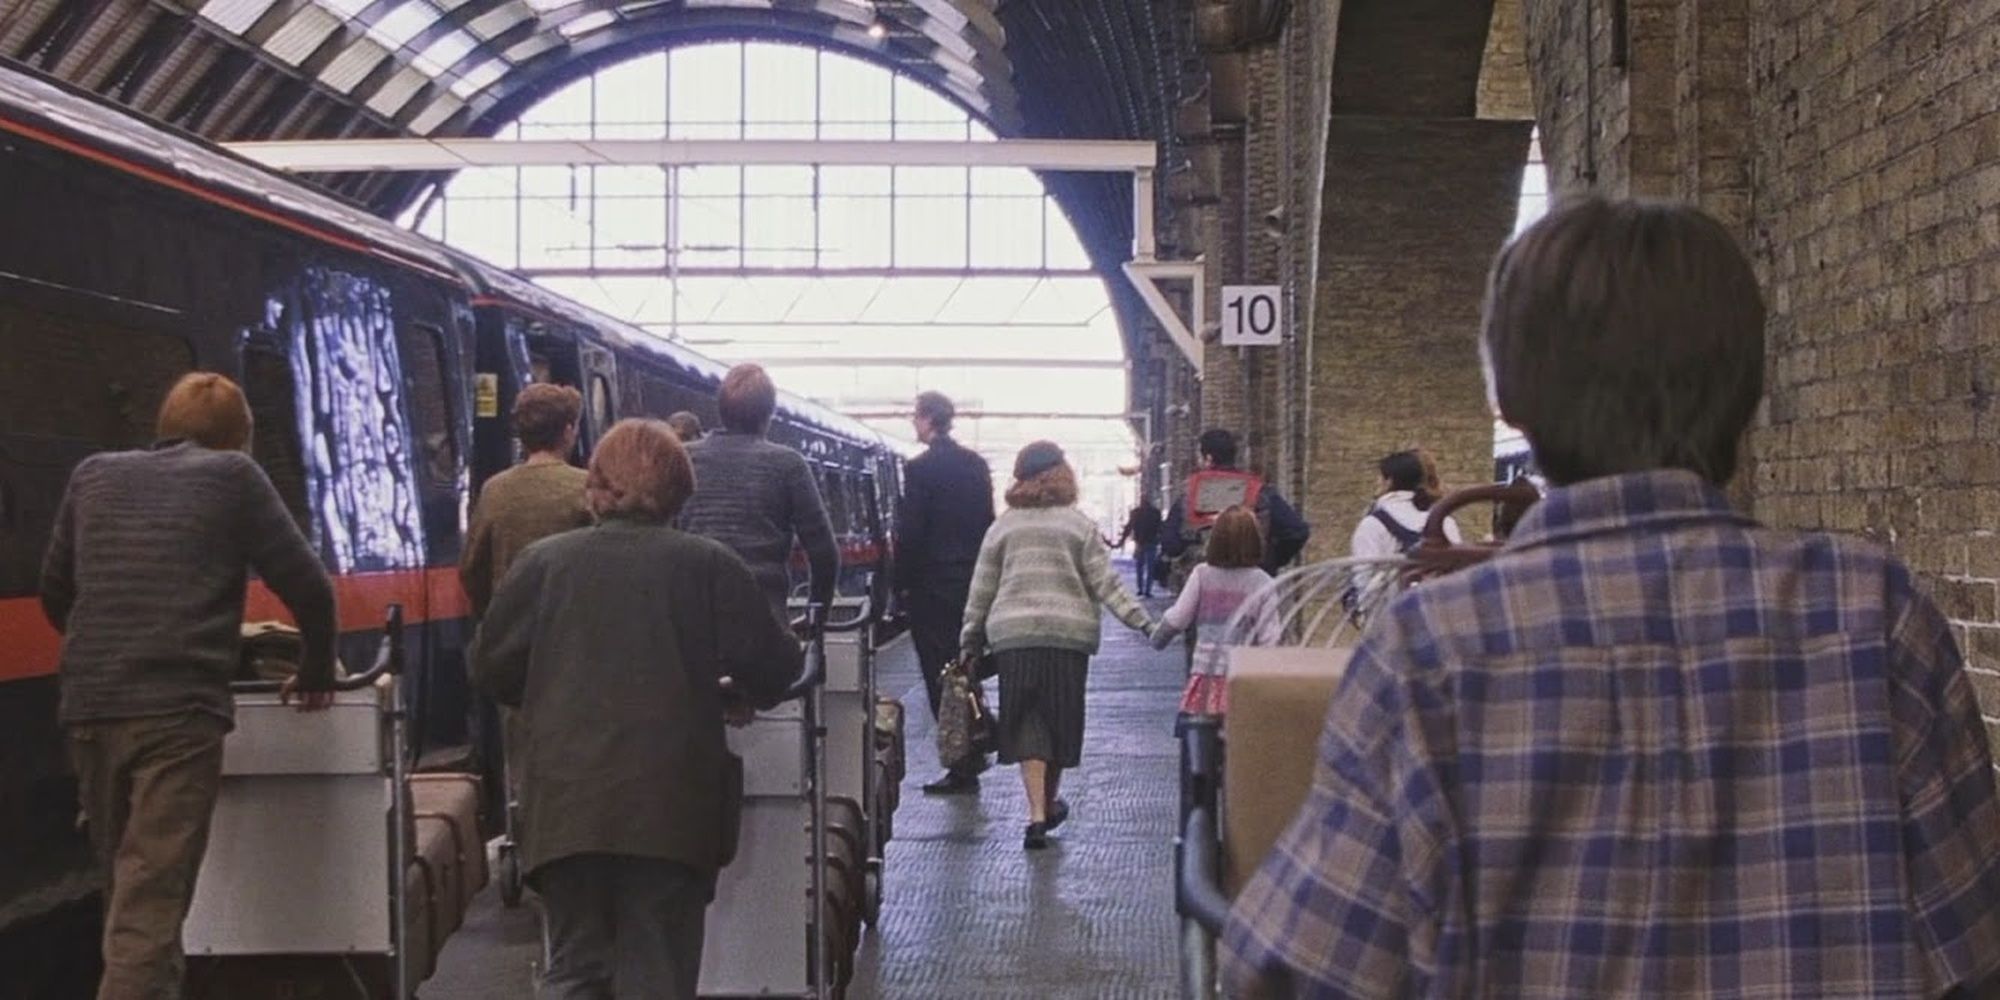 Harry Potter meets the Wealseys for the first time in Harry Potter and the Sorcerer's Stone at Platform 9 3/4